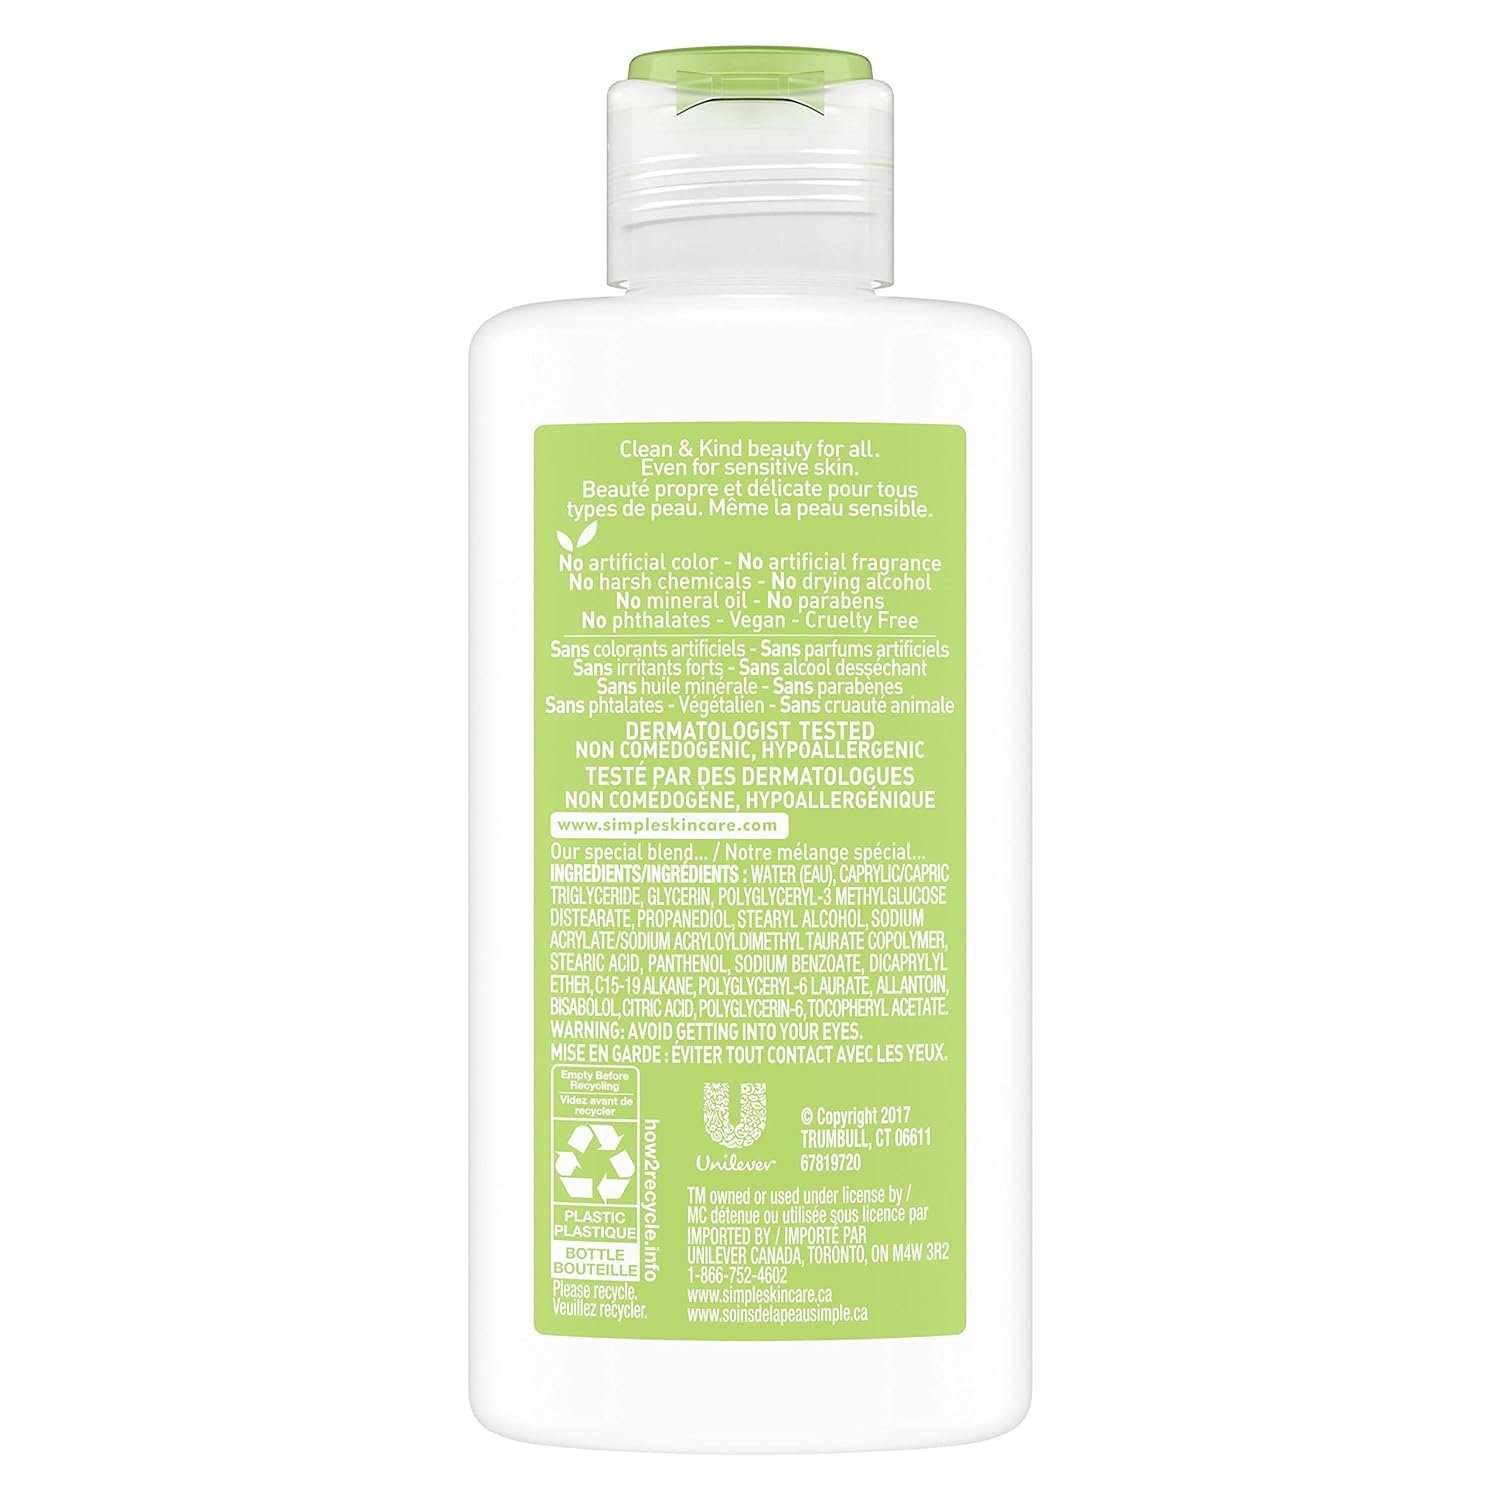 Simple Kind to Skin Face Moisturizer Replenishing Rich 12-Hour Moisturization for All Skin Types, 4.2 fl oz - image 2 of 12